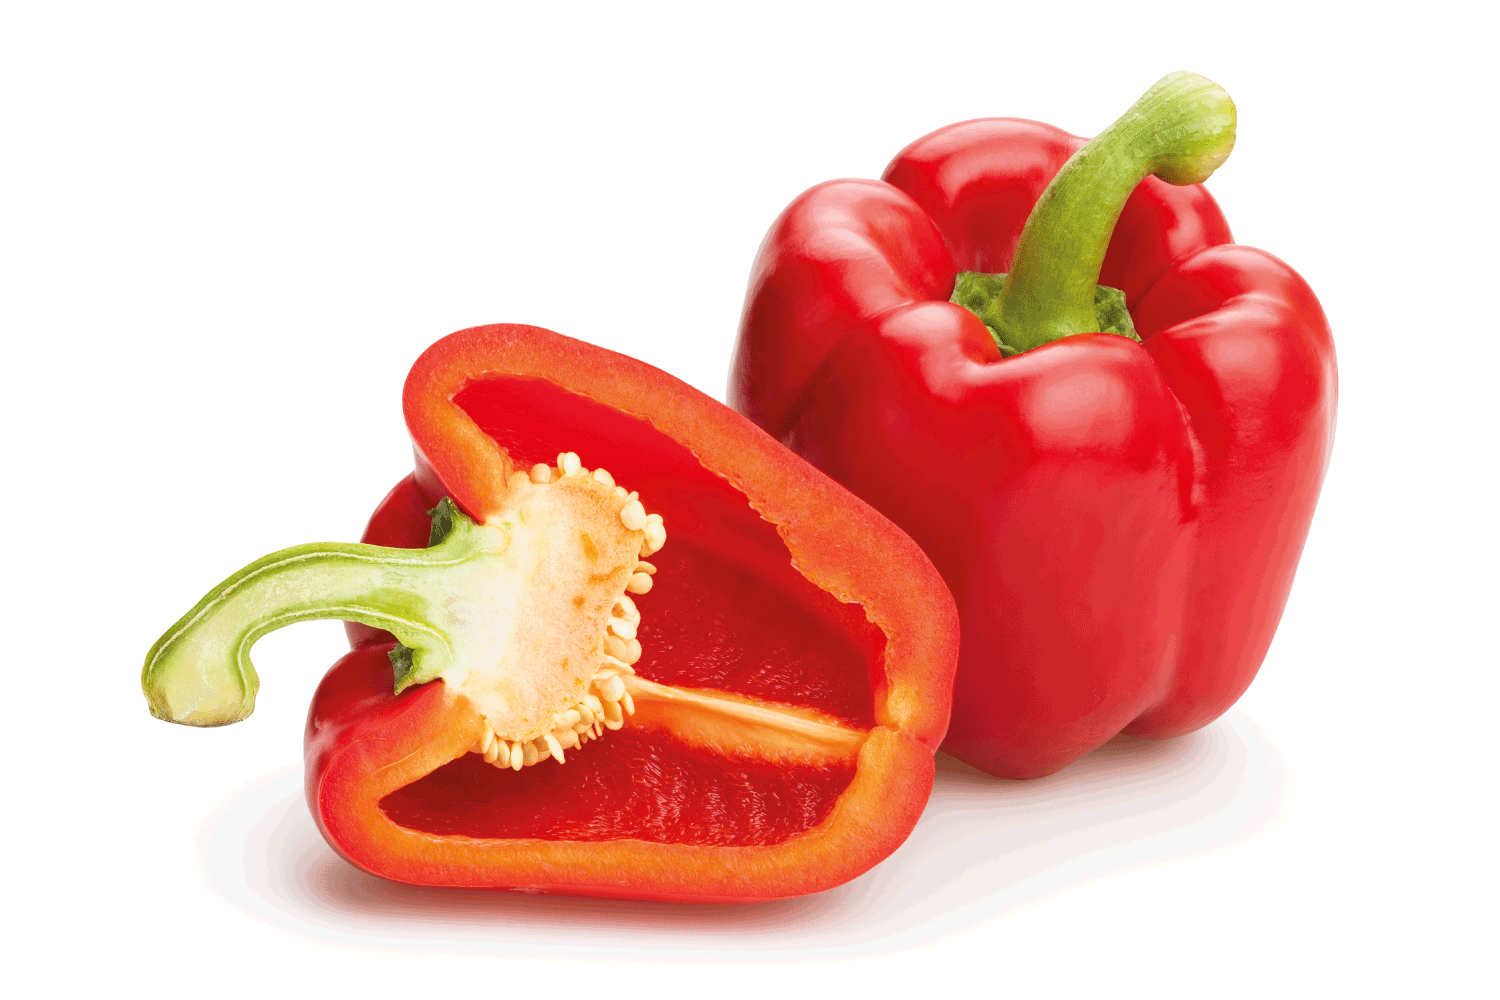 red bell pepper whole and half